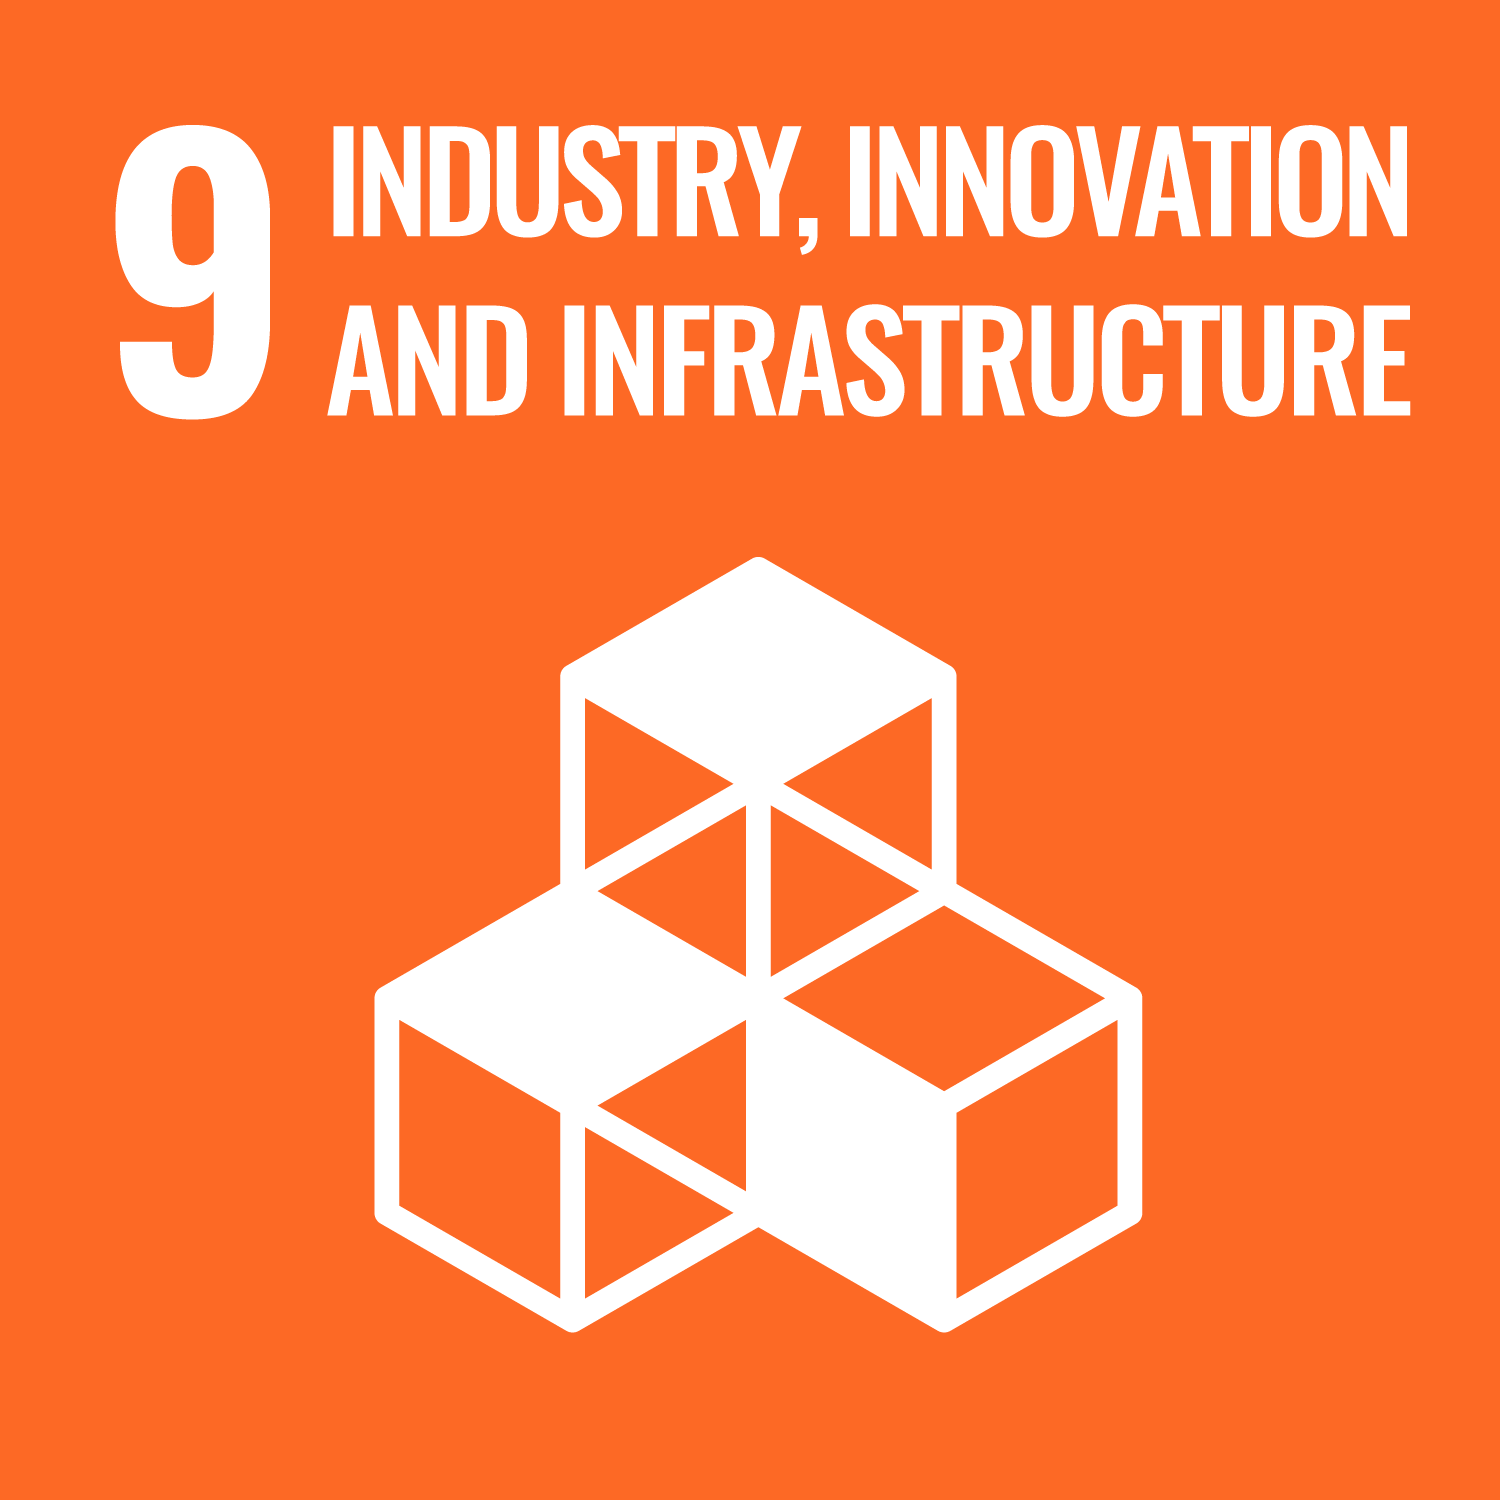 Industry, Innovation and Infrastructure (UN SDG 9)